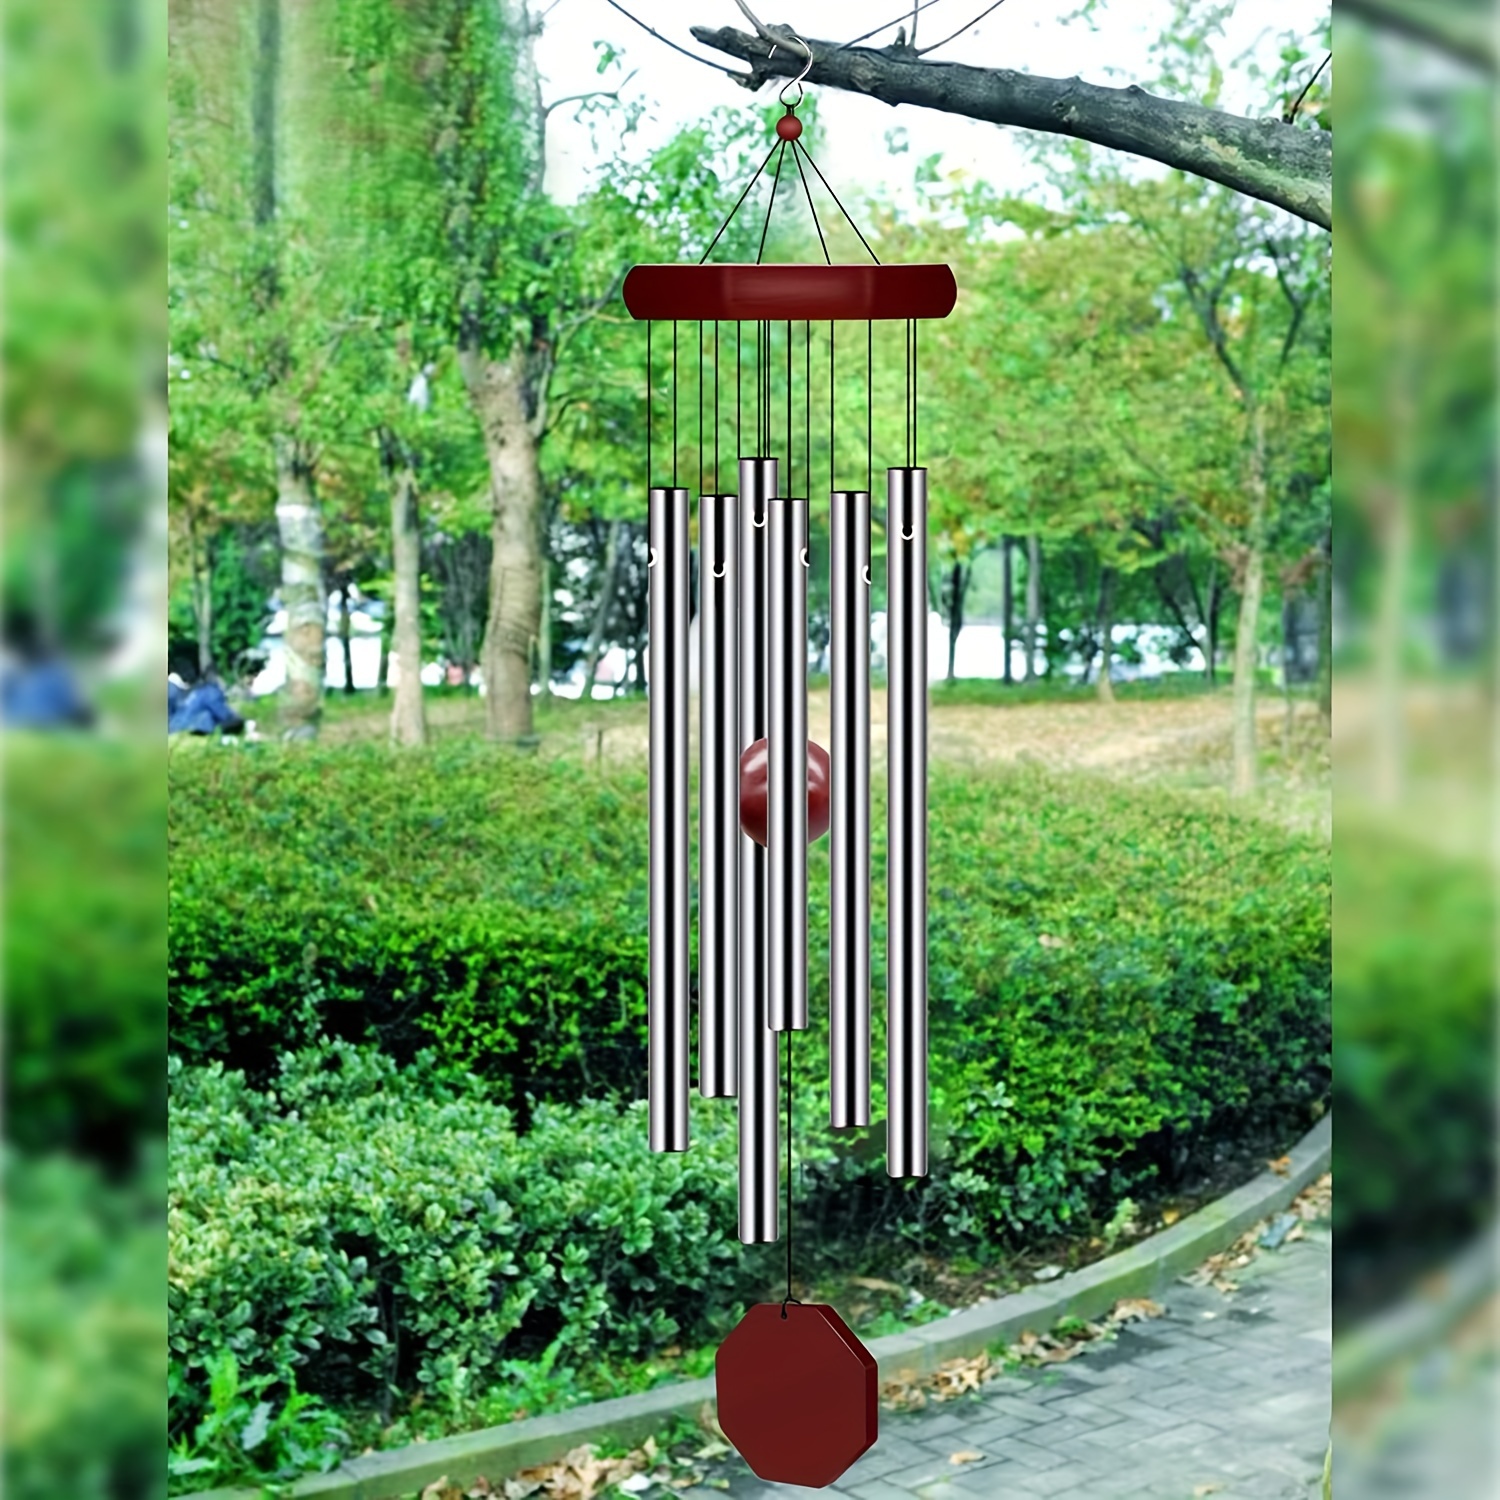 

1pc Commemorative Wind Chime Outdoor Deep Tone Elegant Sympathy Wind Chime, Suitable For Garden Terrace Balcony And Home Elegant Wind Chime